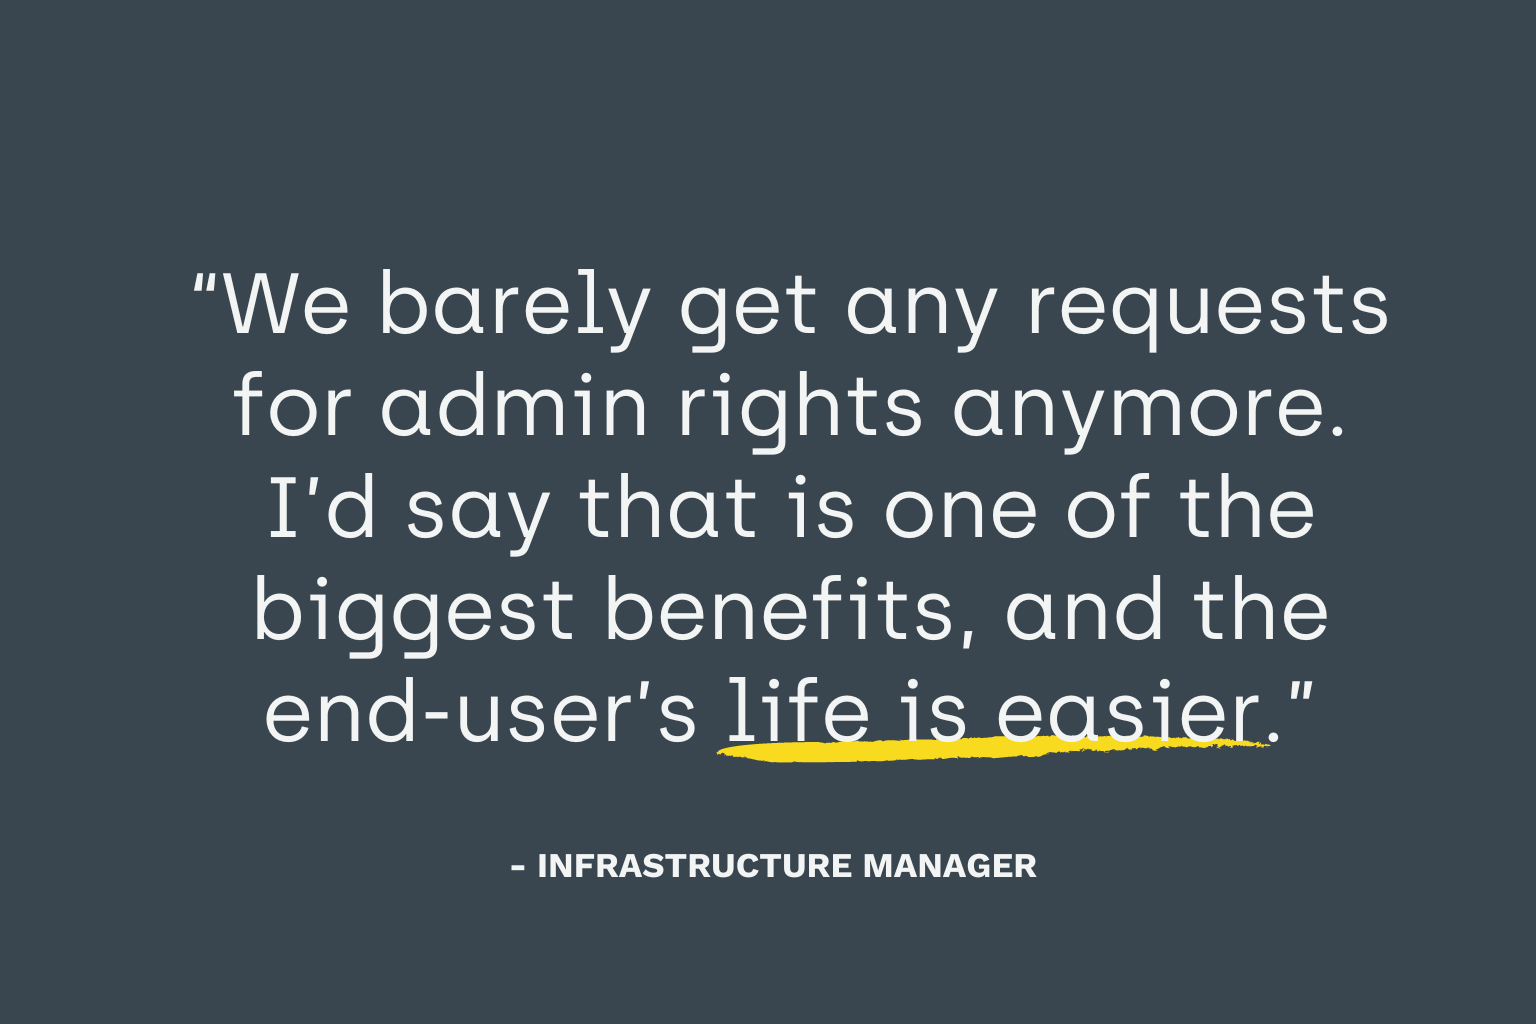 Quote from Infrastructure Manager